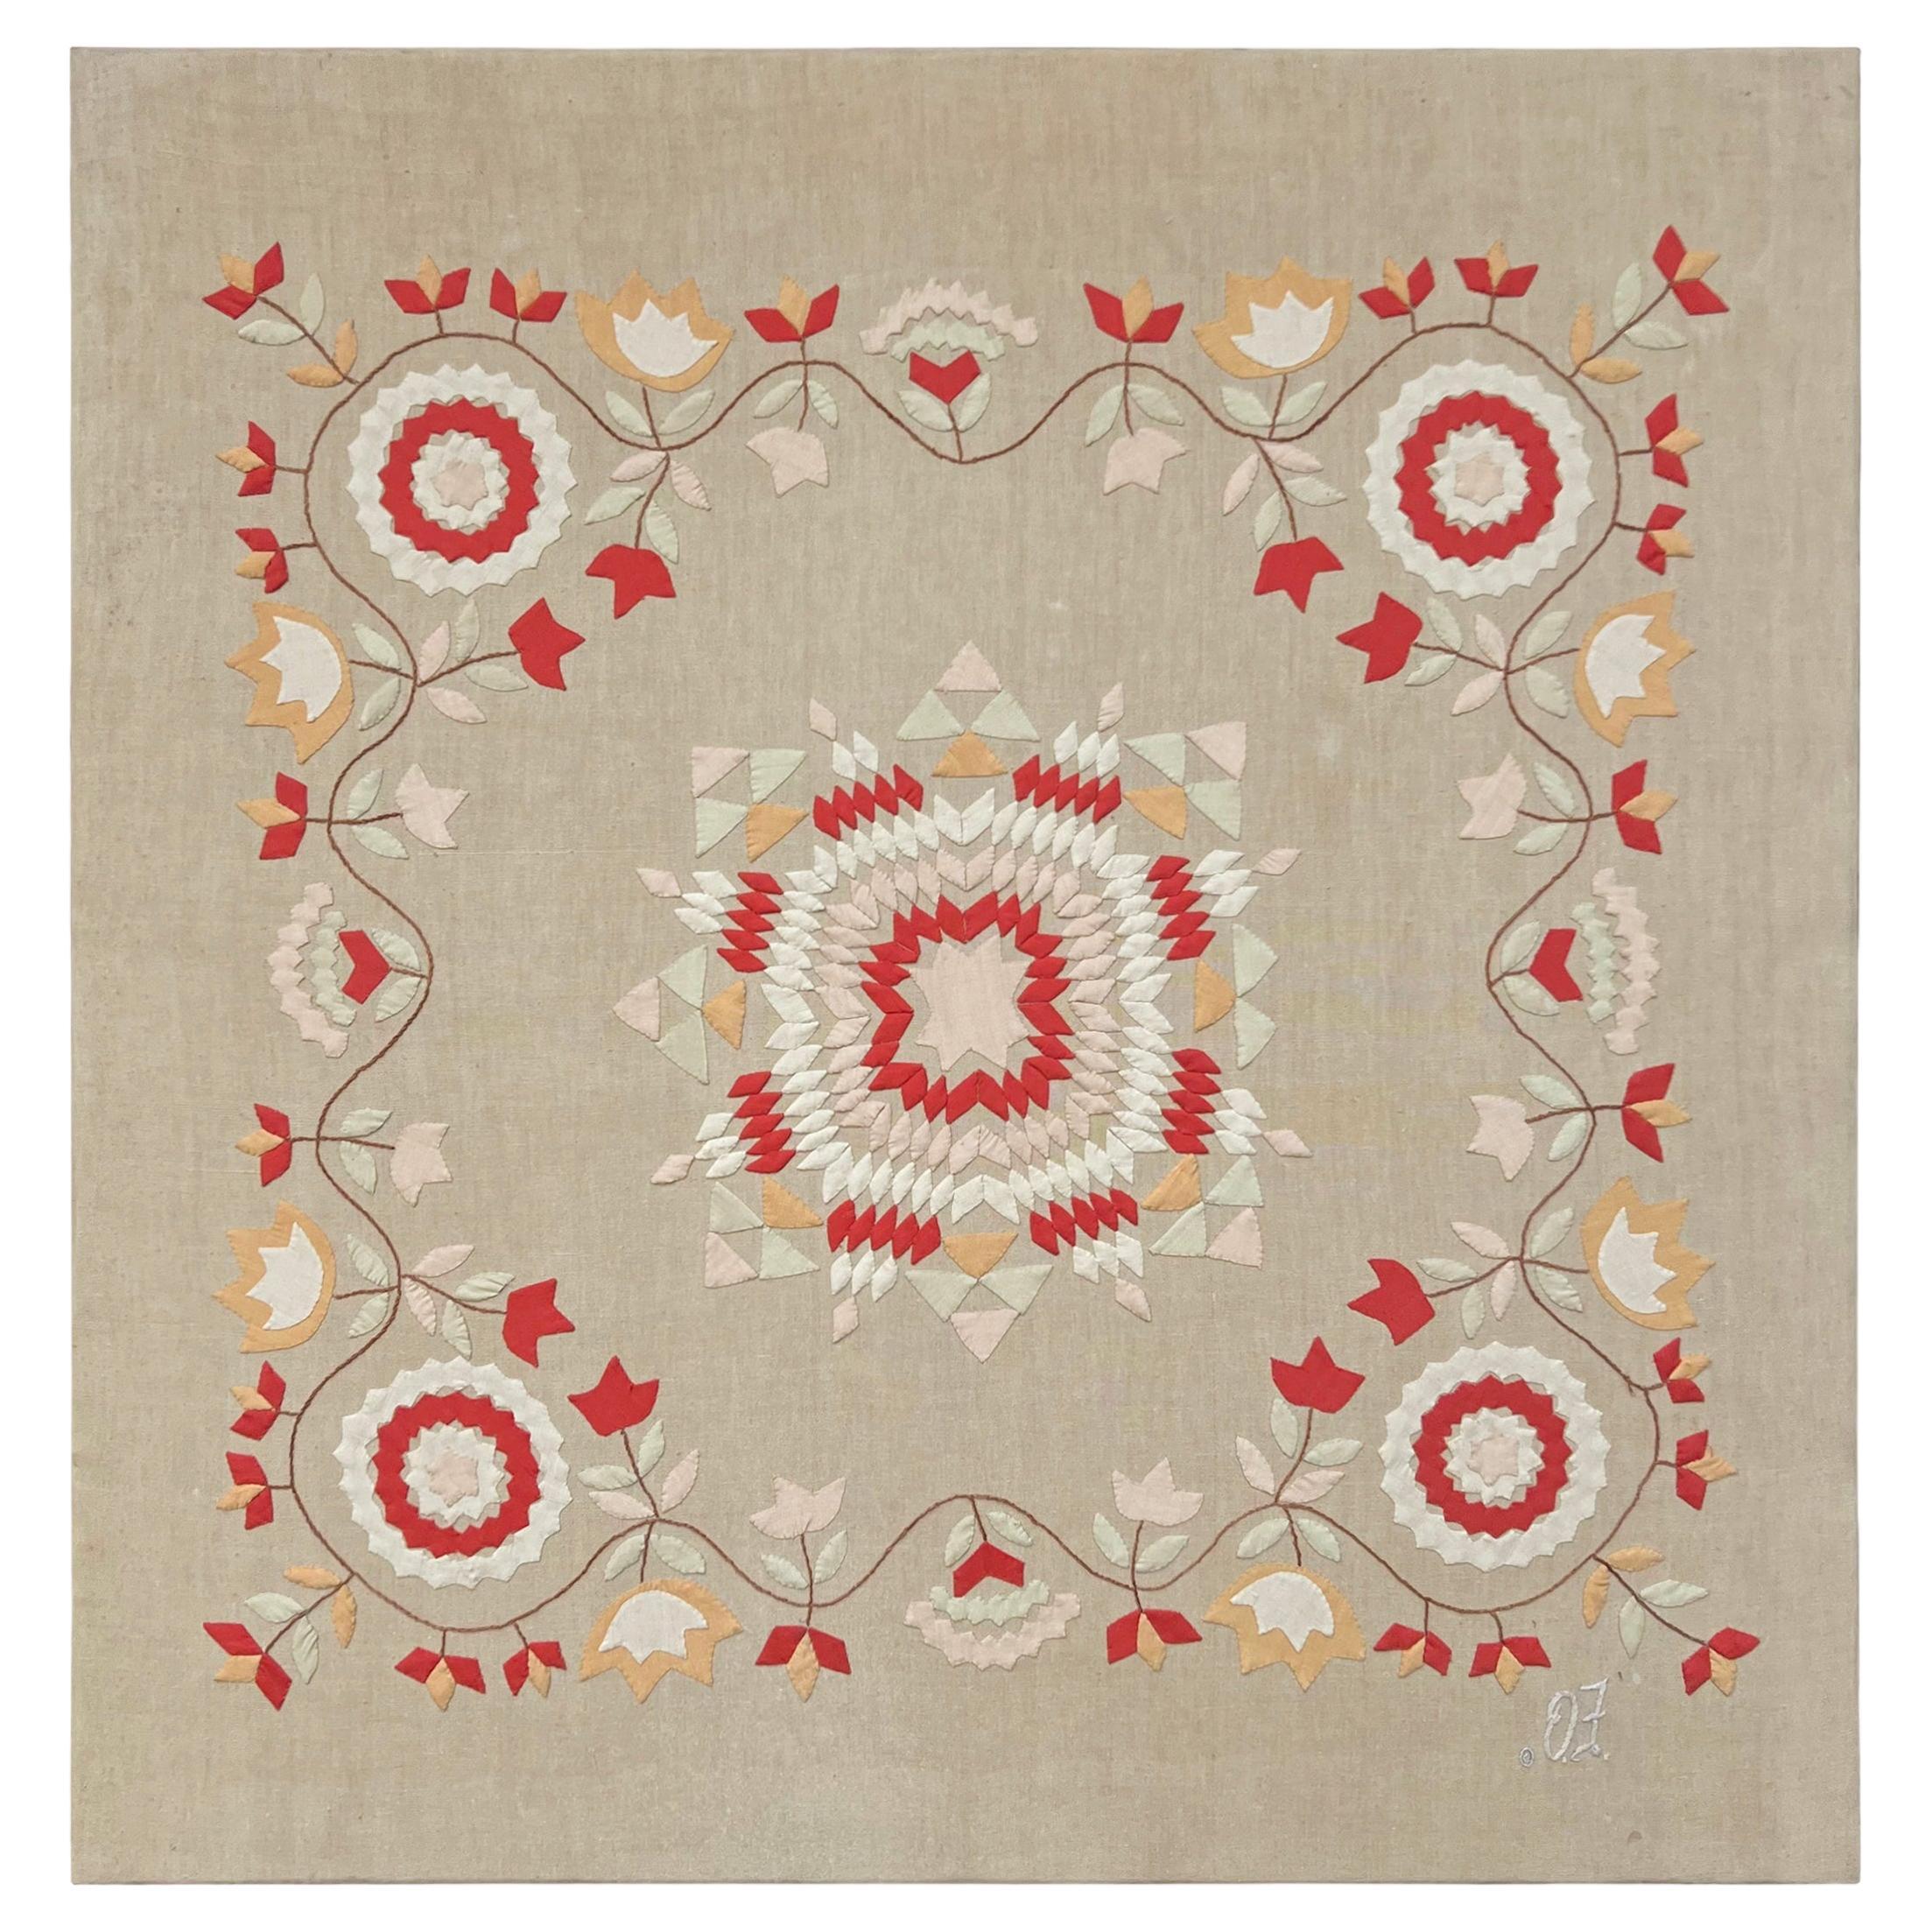 Mounted Late 19th Century American Appliqué Textile For Sale